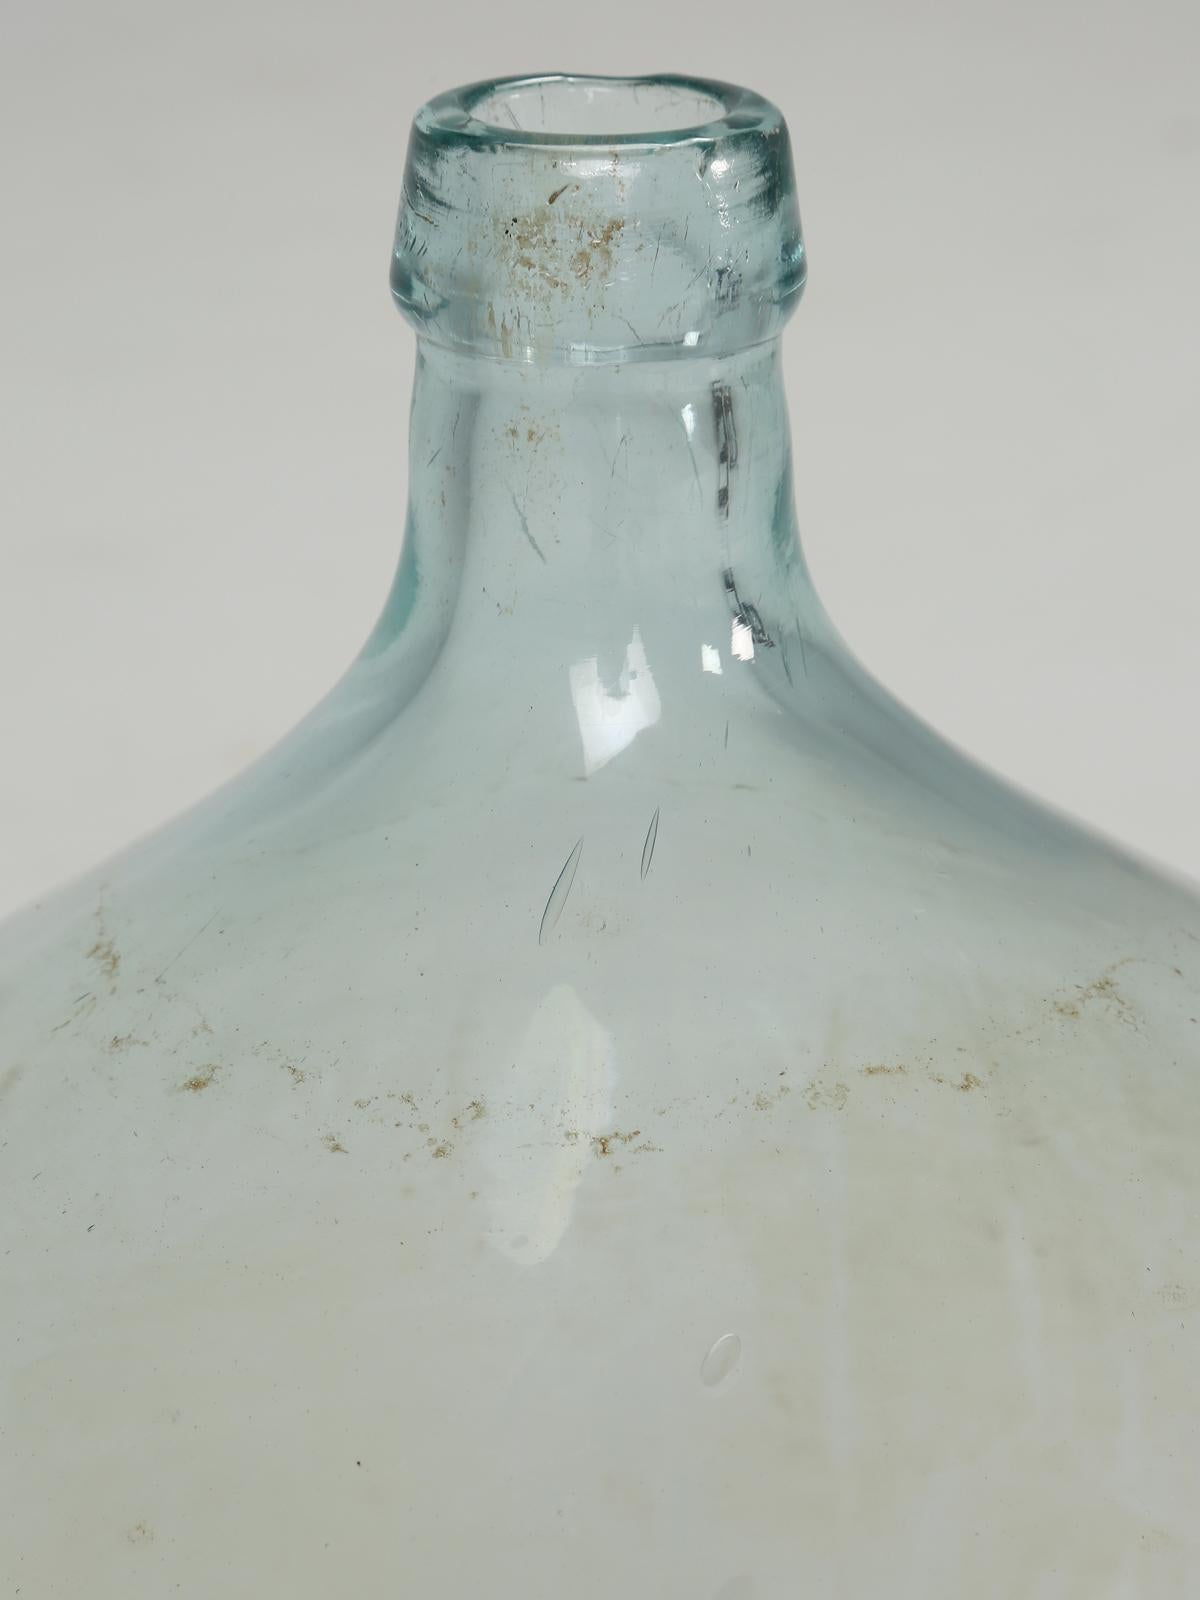 Country Demijohn or Carboy Glass Bottle in the Original Wooden Crate For Sale